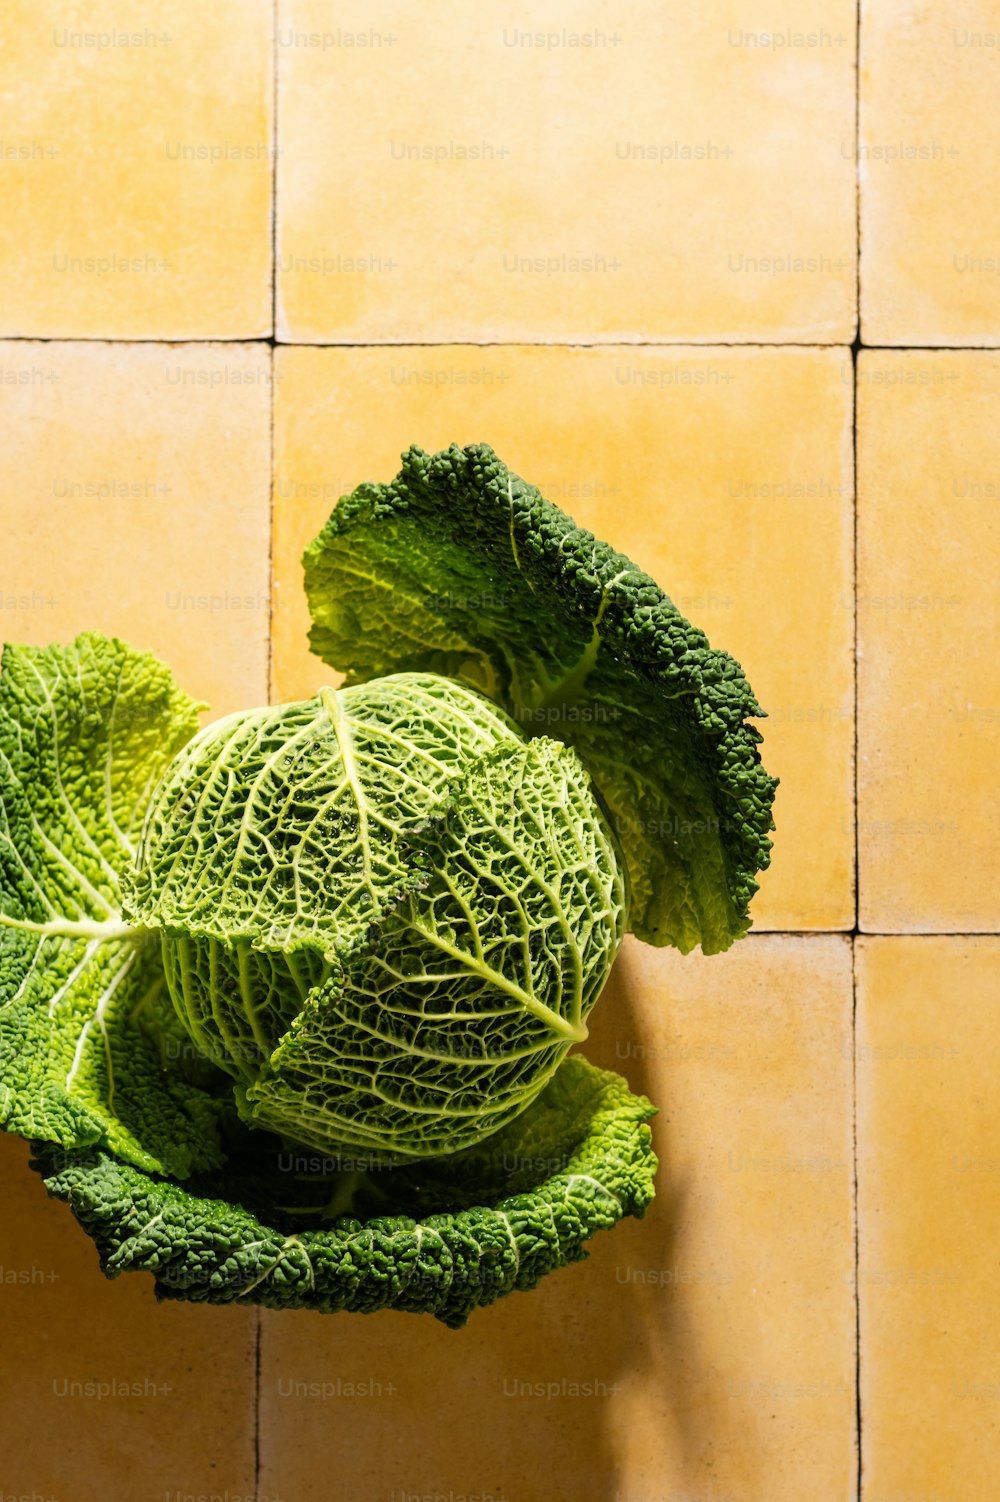 a head of cabbage on a yellow tiled surface